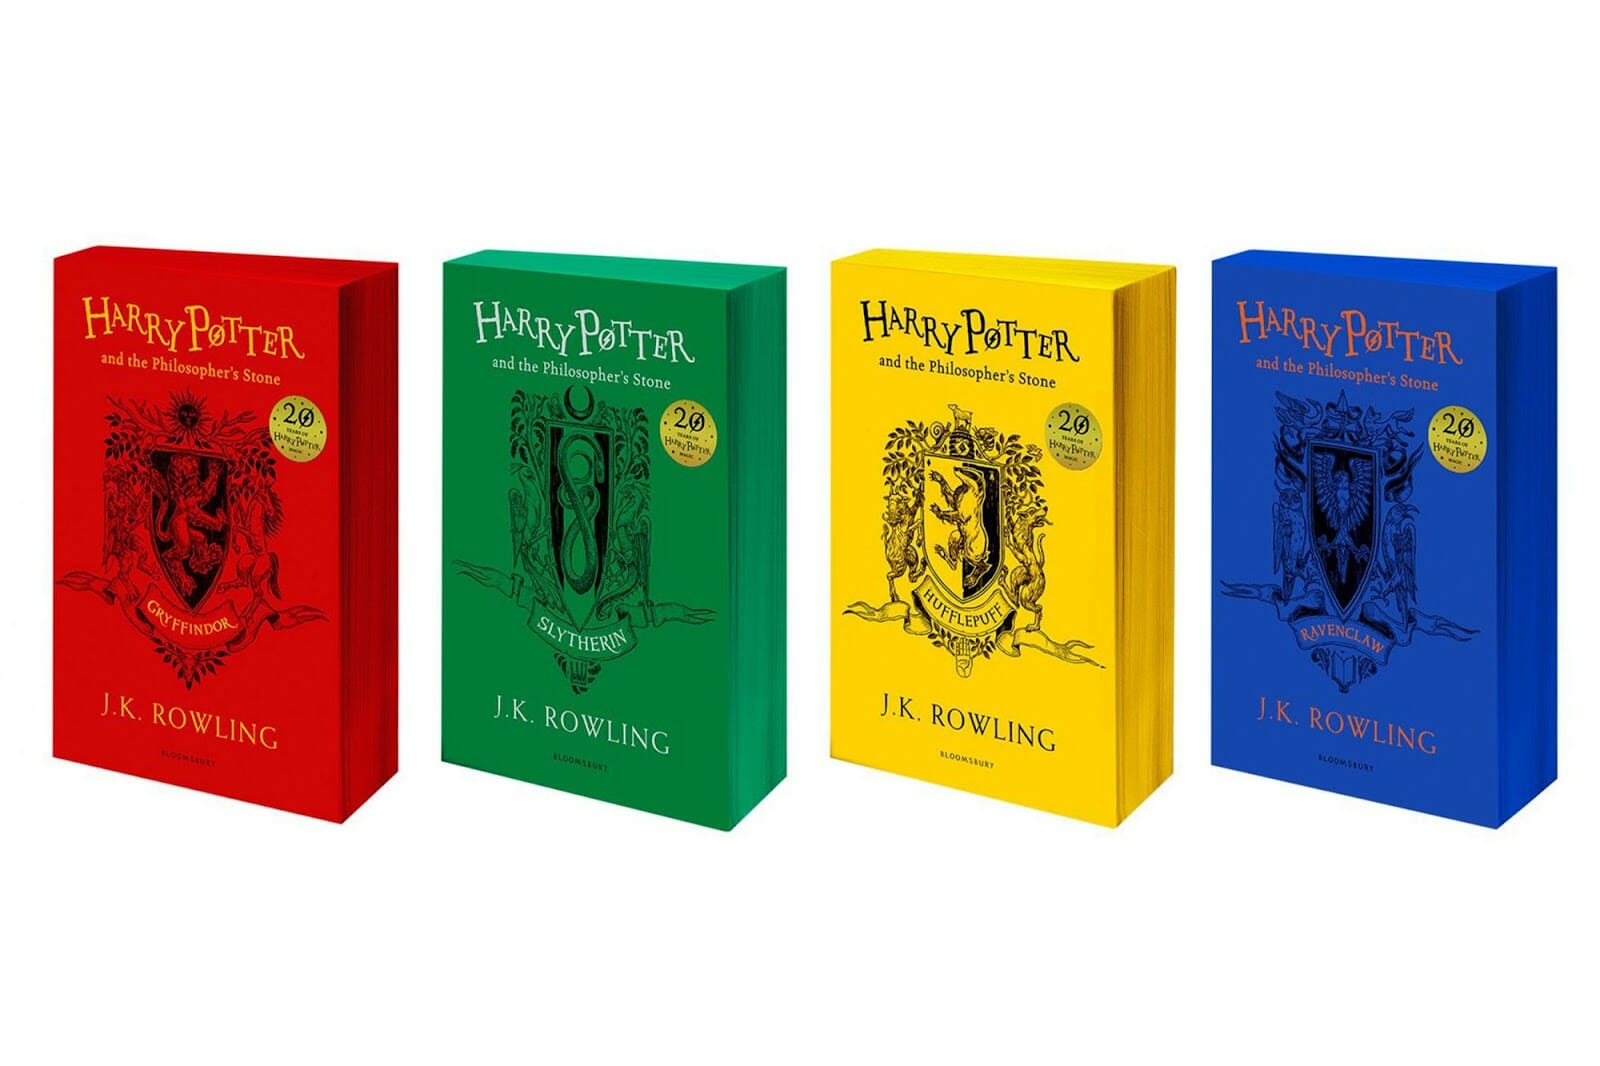 Hogwarts House edition Harry Potter book covers